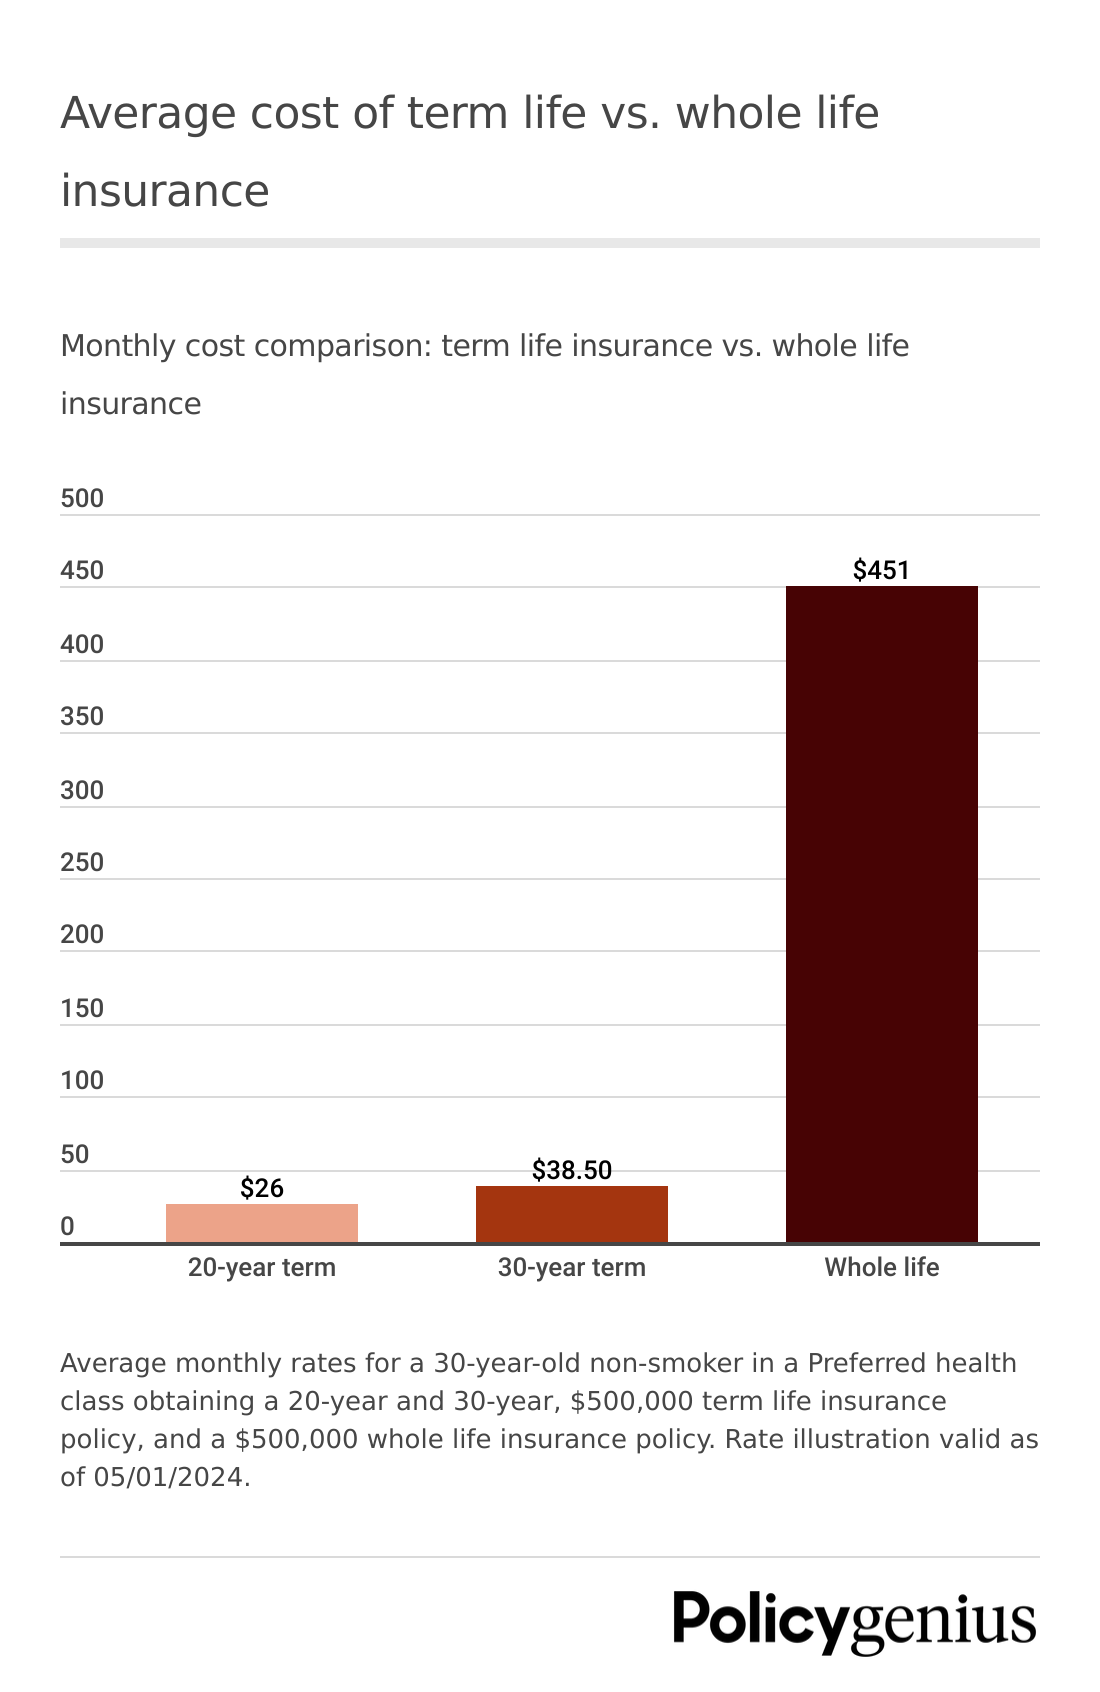 Cost comparison between 20-year term, 30-year term, and whole life insurance policies offered through Policygenius.